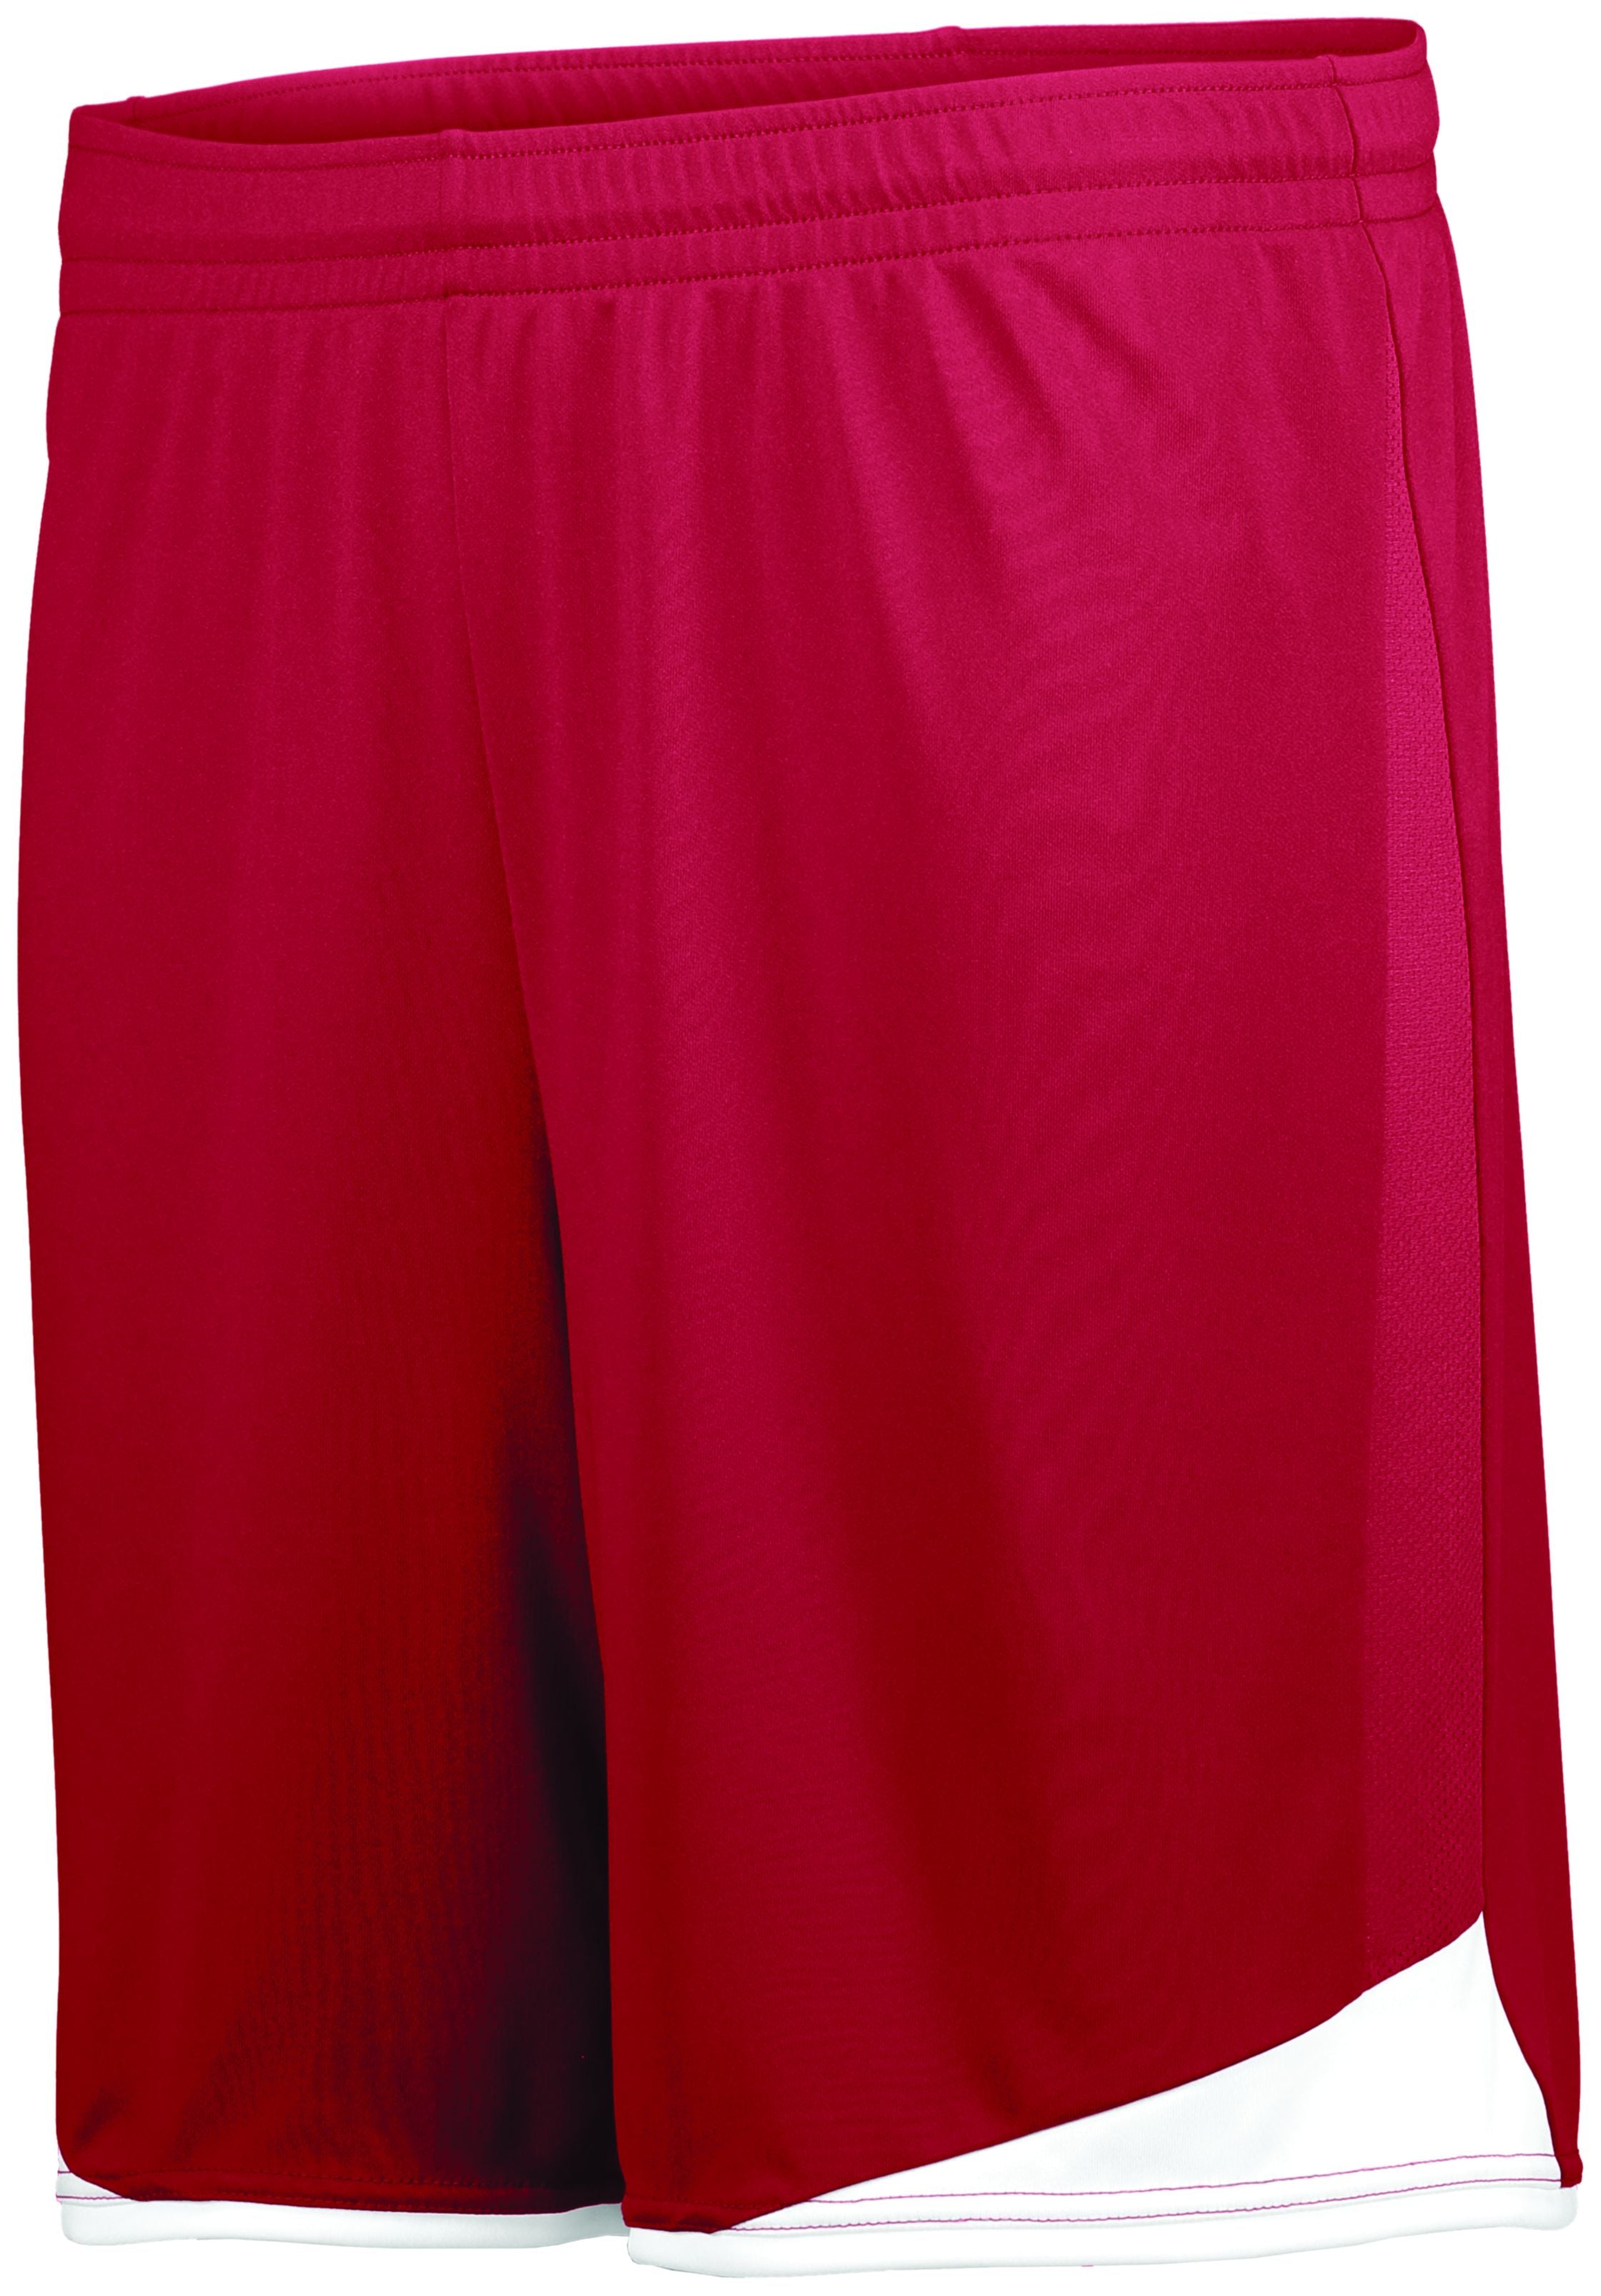 High 5 Youth Stamford Soccer Shorts in Scarlet/White  -Part of the Youth, Youth-Shorts, High5-Products, Soccer, All-Sports-1 product lines at KanaleyCreations.com